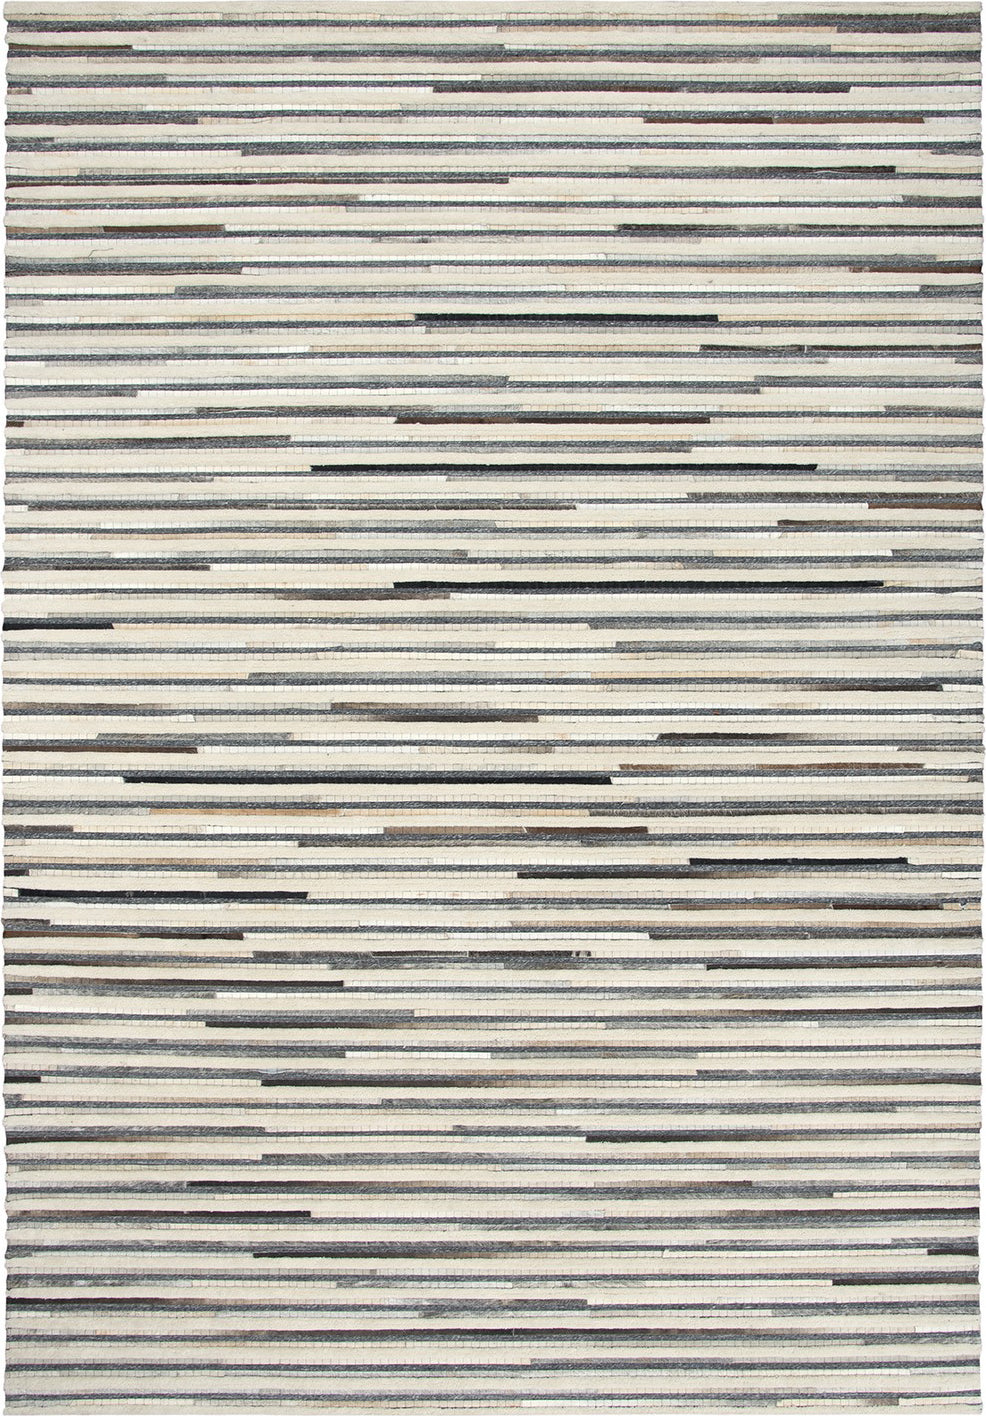 Rizzy Wild Thing WDT106 Gray Area Rug by Donny Osmond Home main image